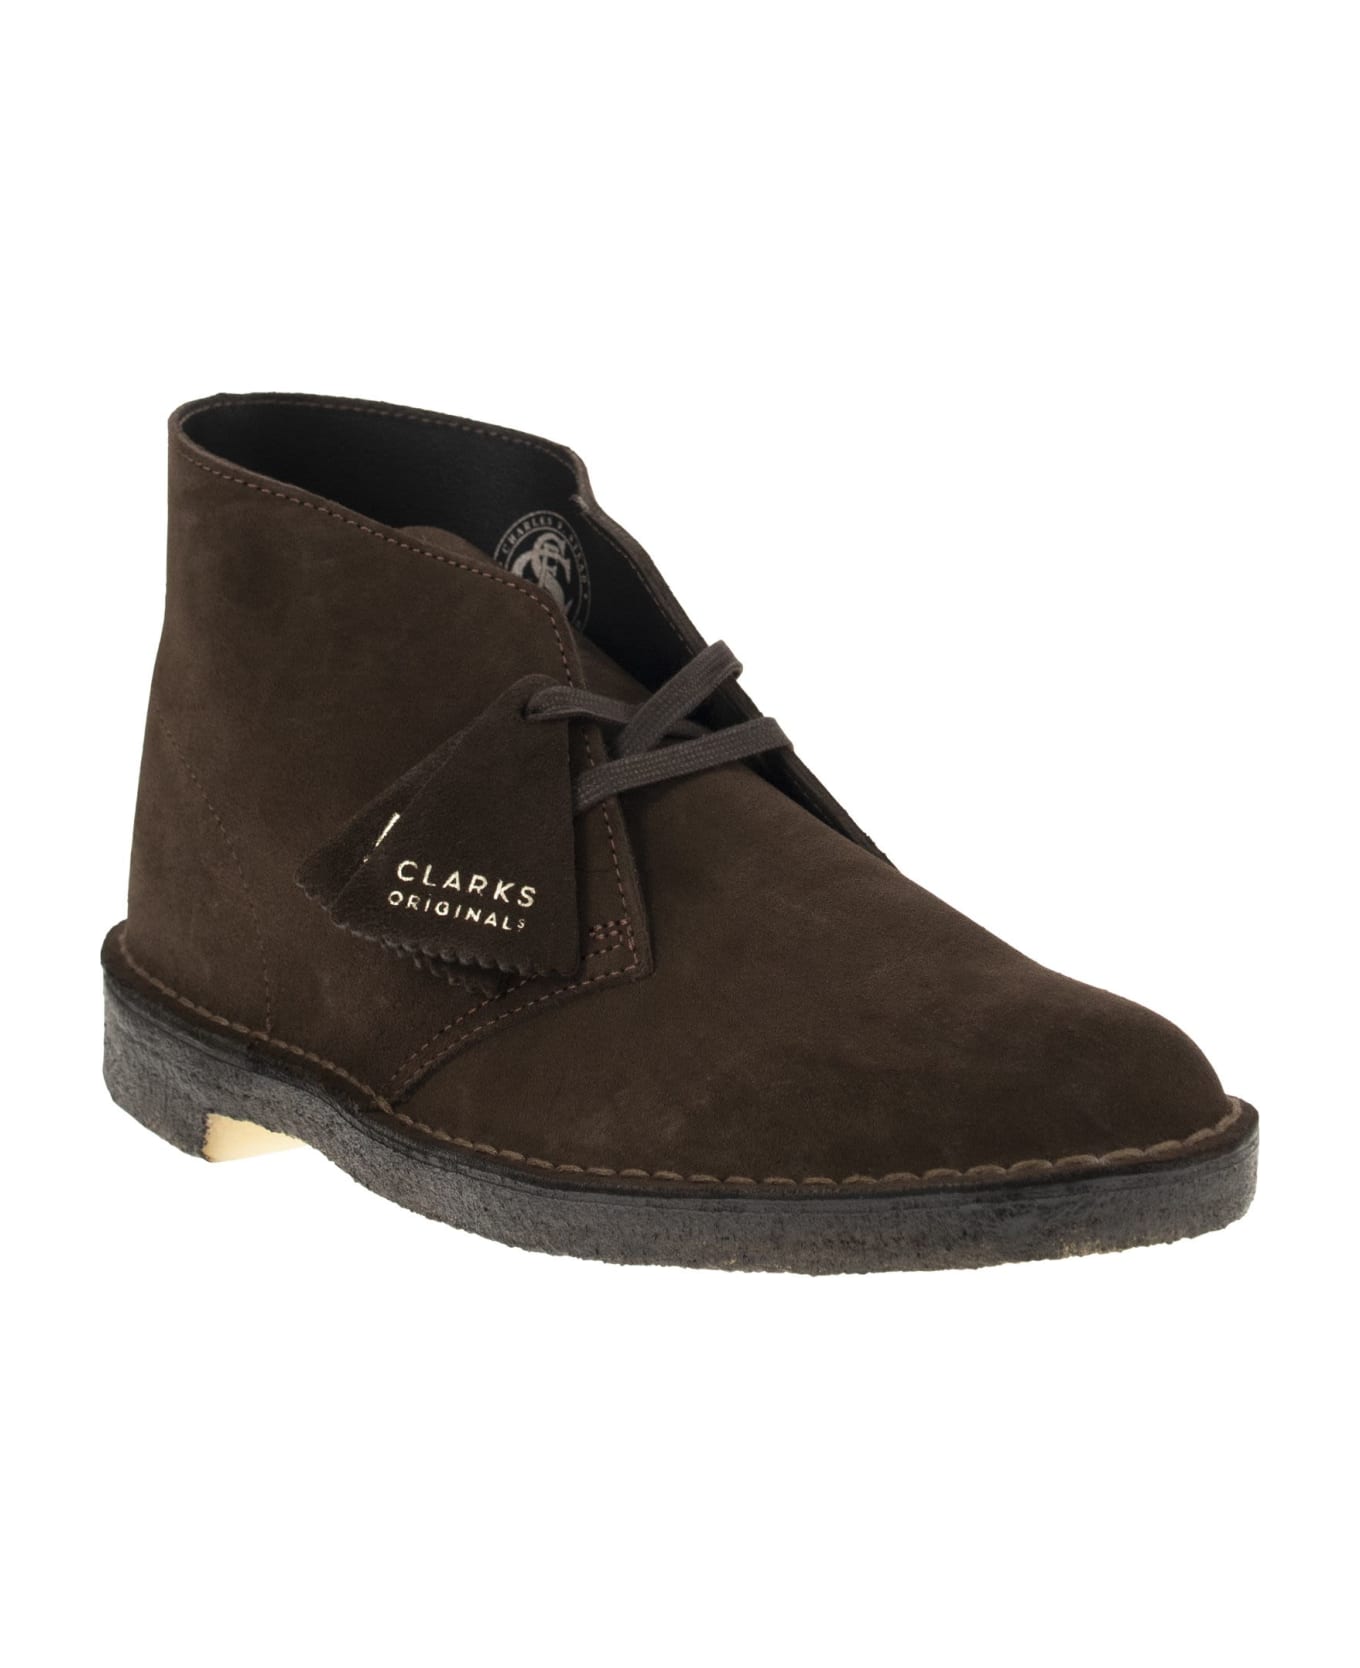 Clarks Desert Boot - Lace-up Boot - Brown